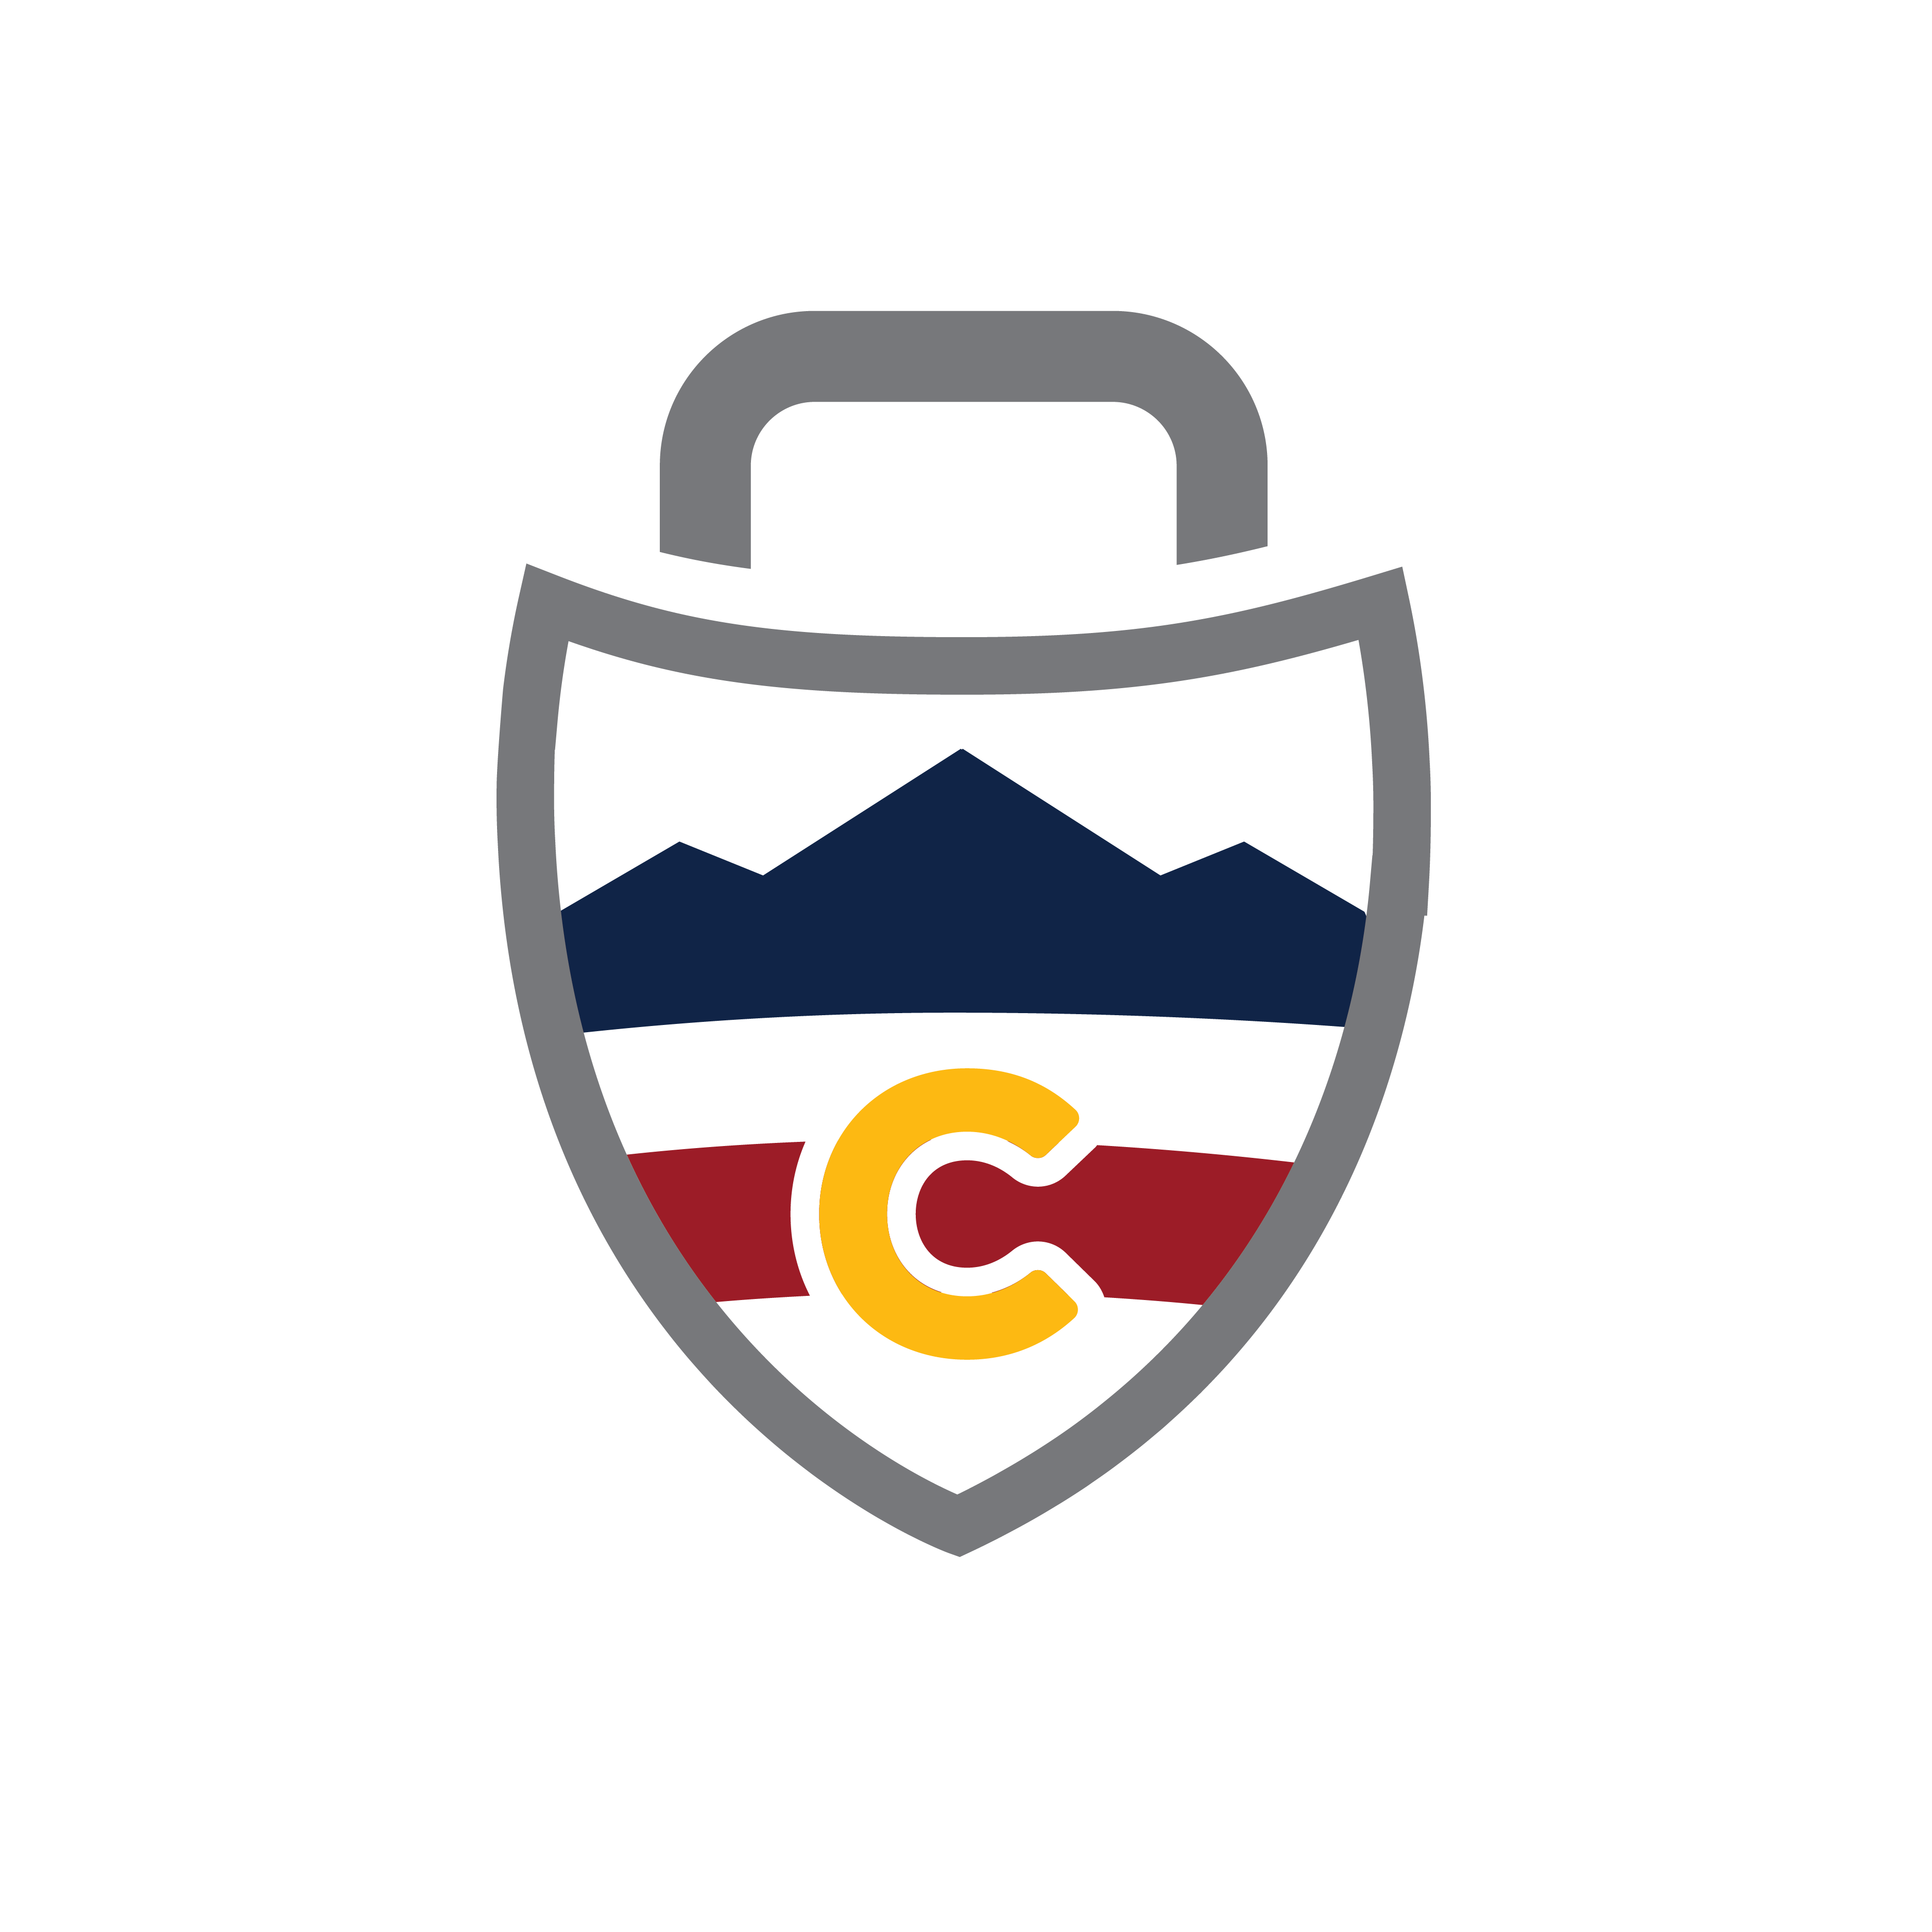 Colorado Cyber Resource Center Mark logo design by logo designer Neon Pig Creative for your inspiration and for the worlds largest logo competition